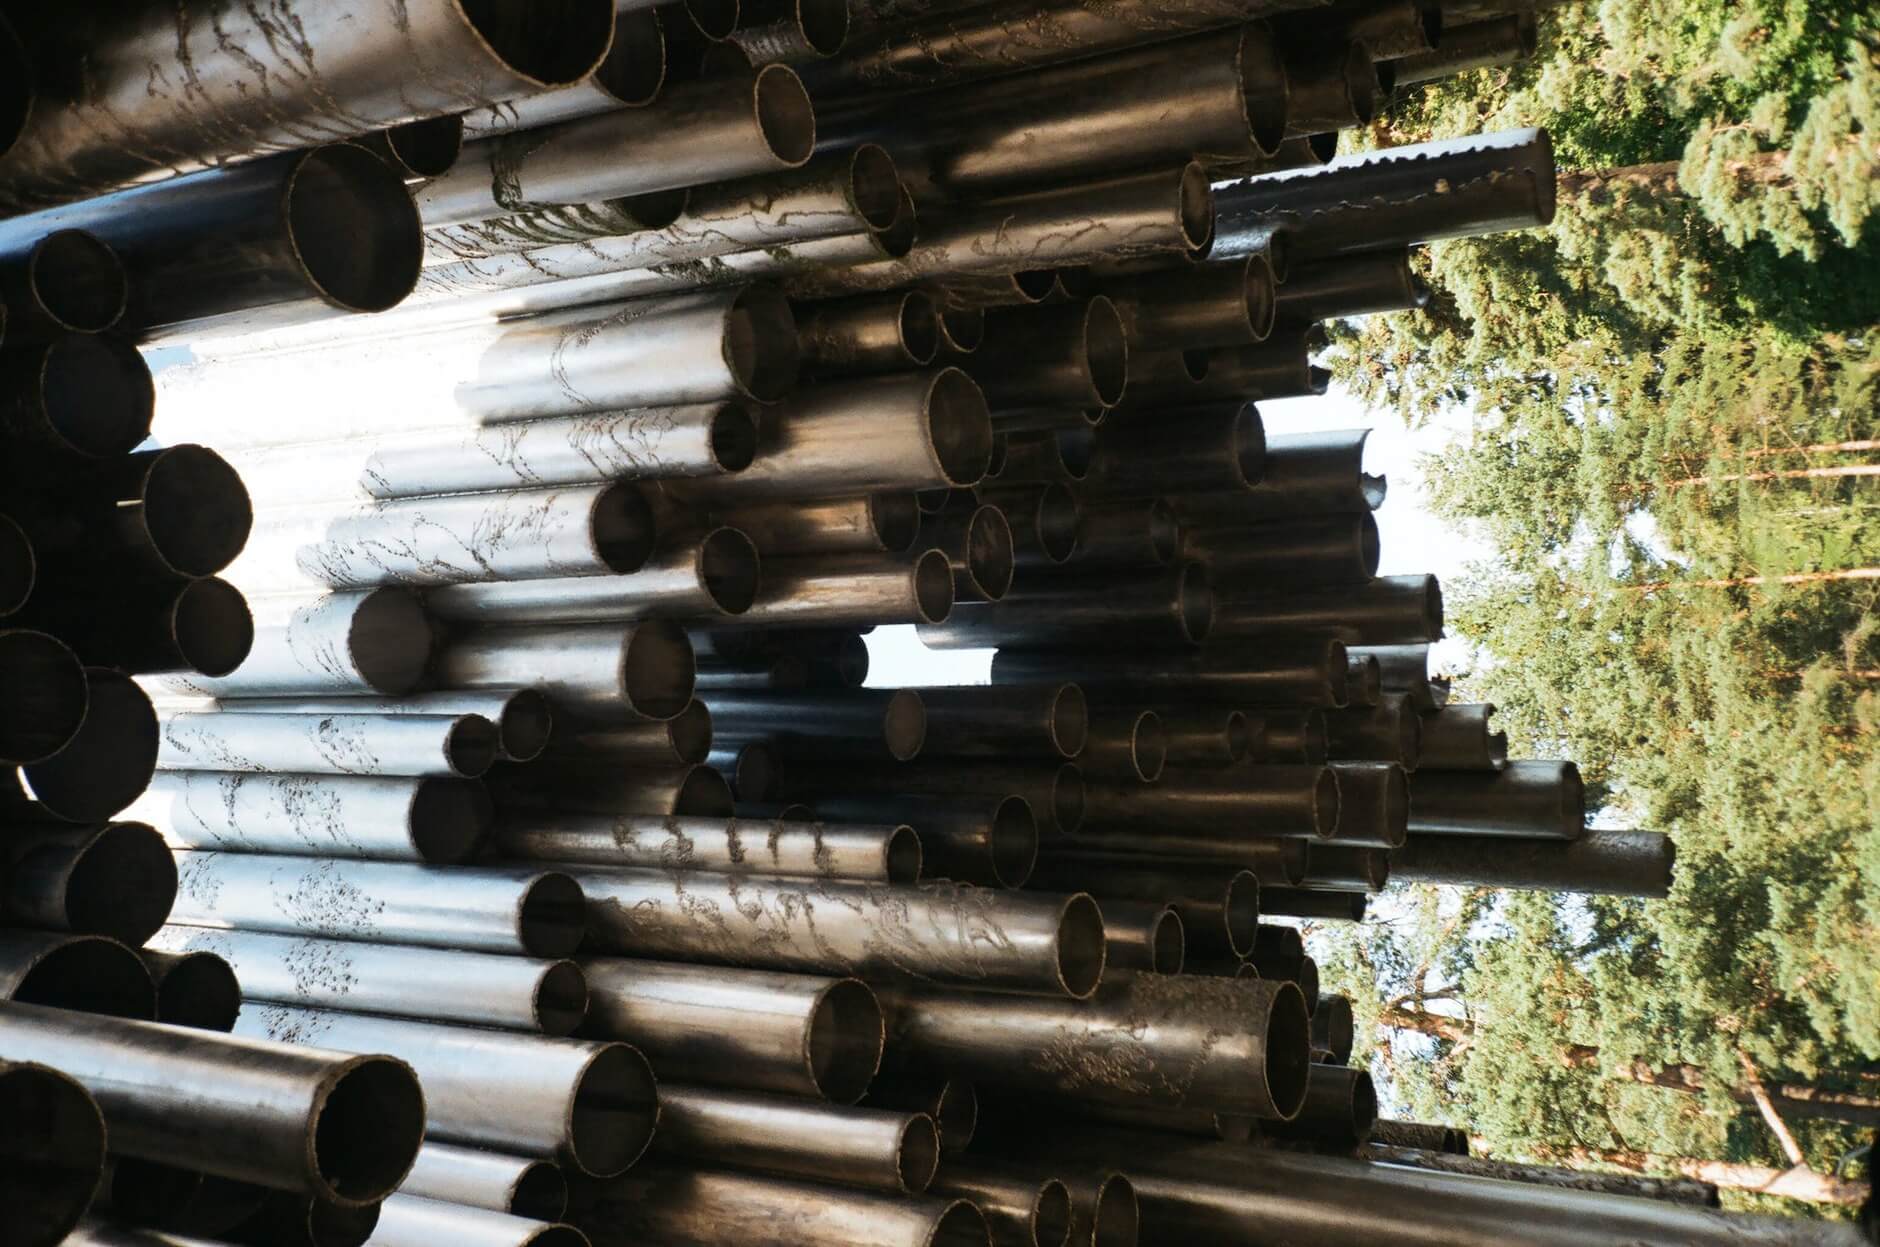 Pile of pipes